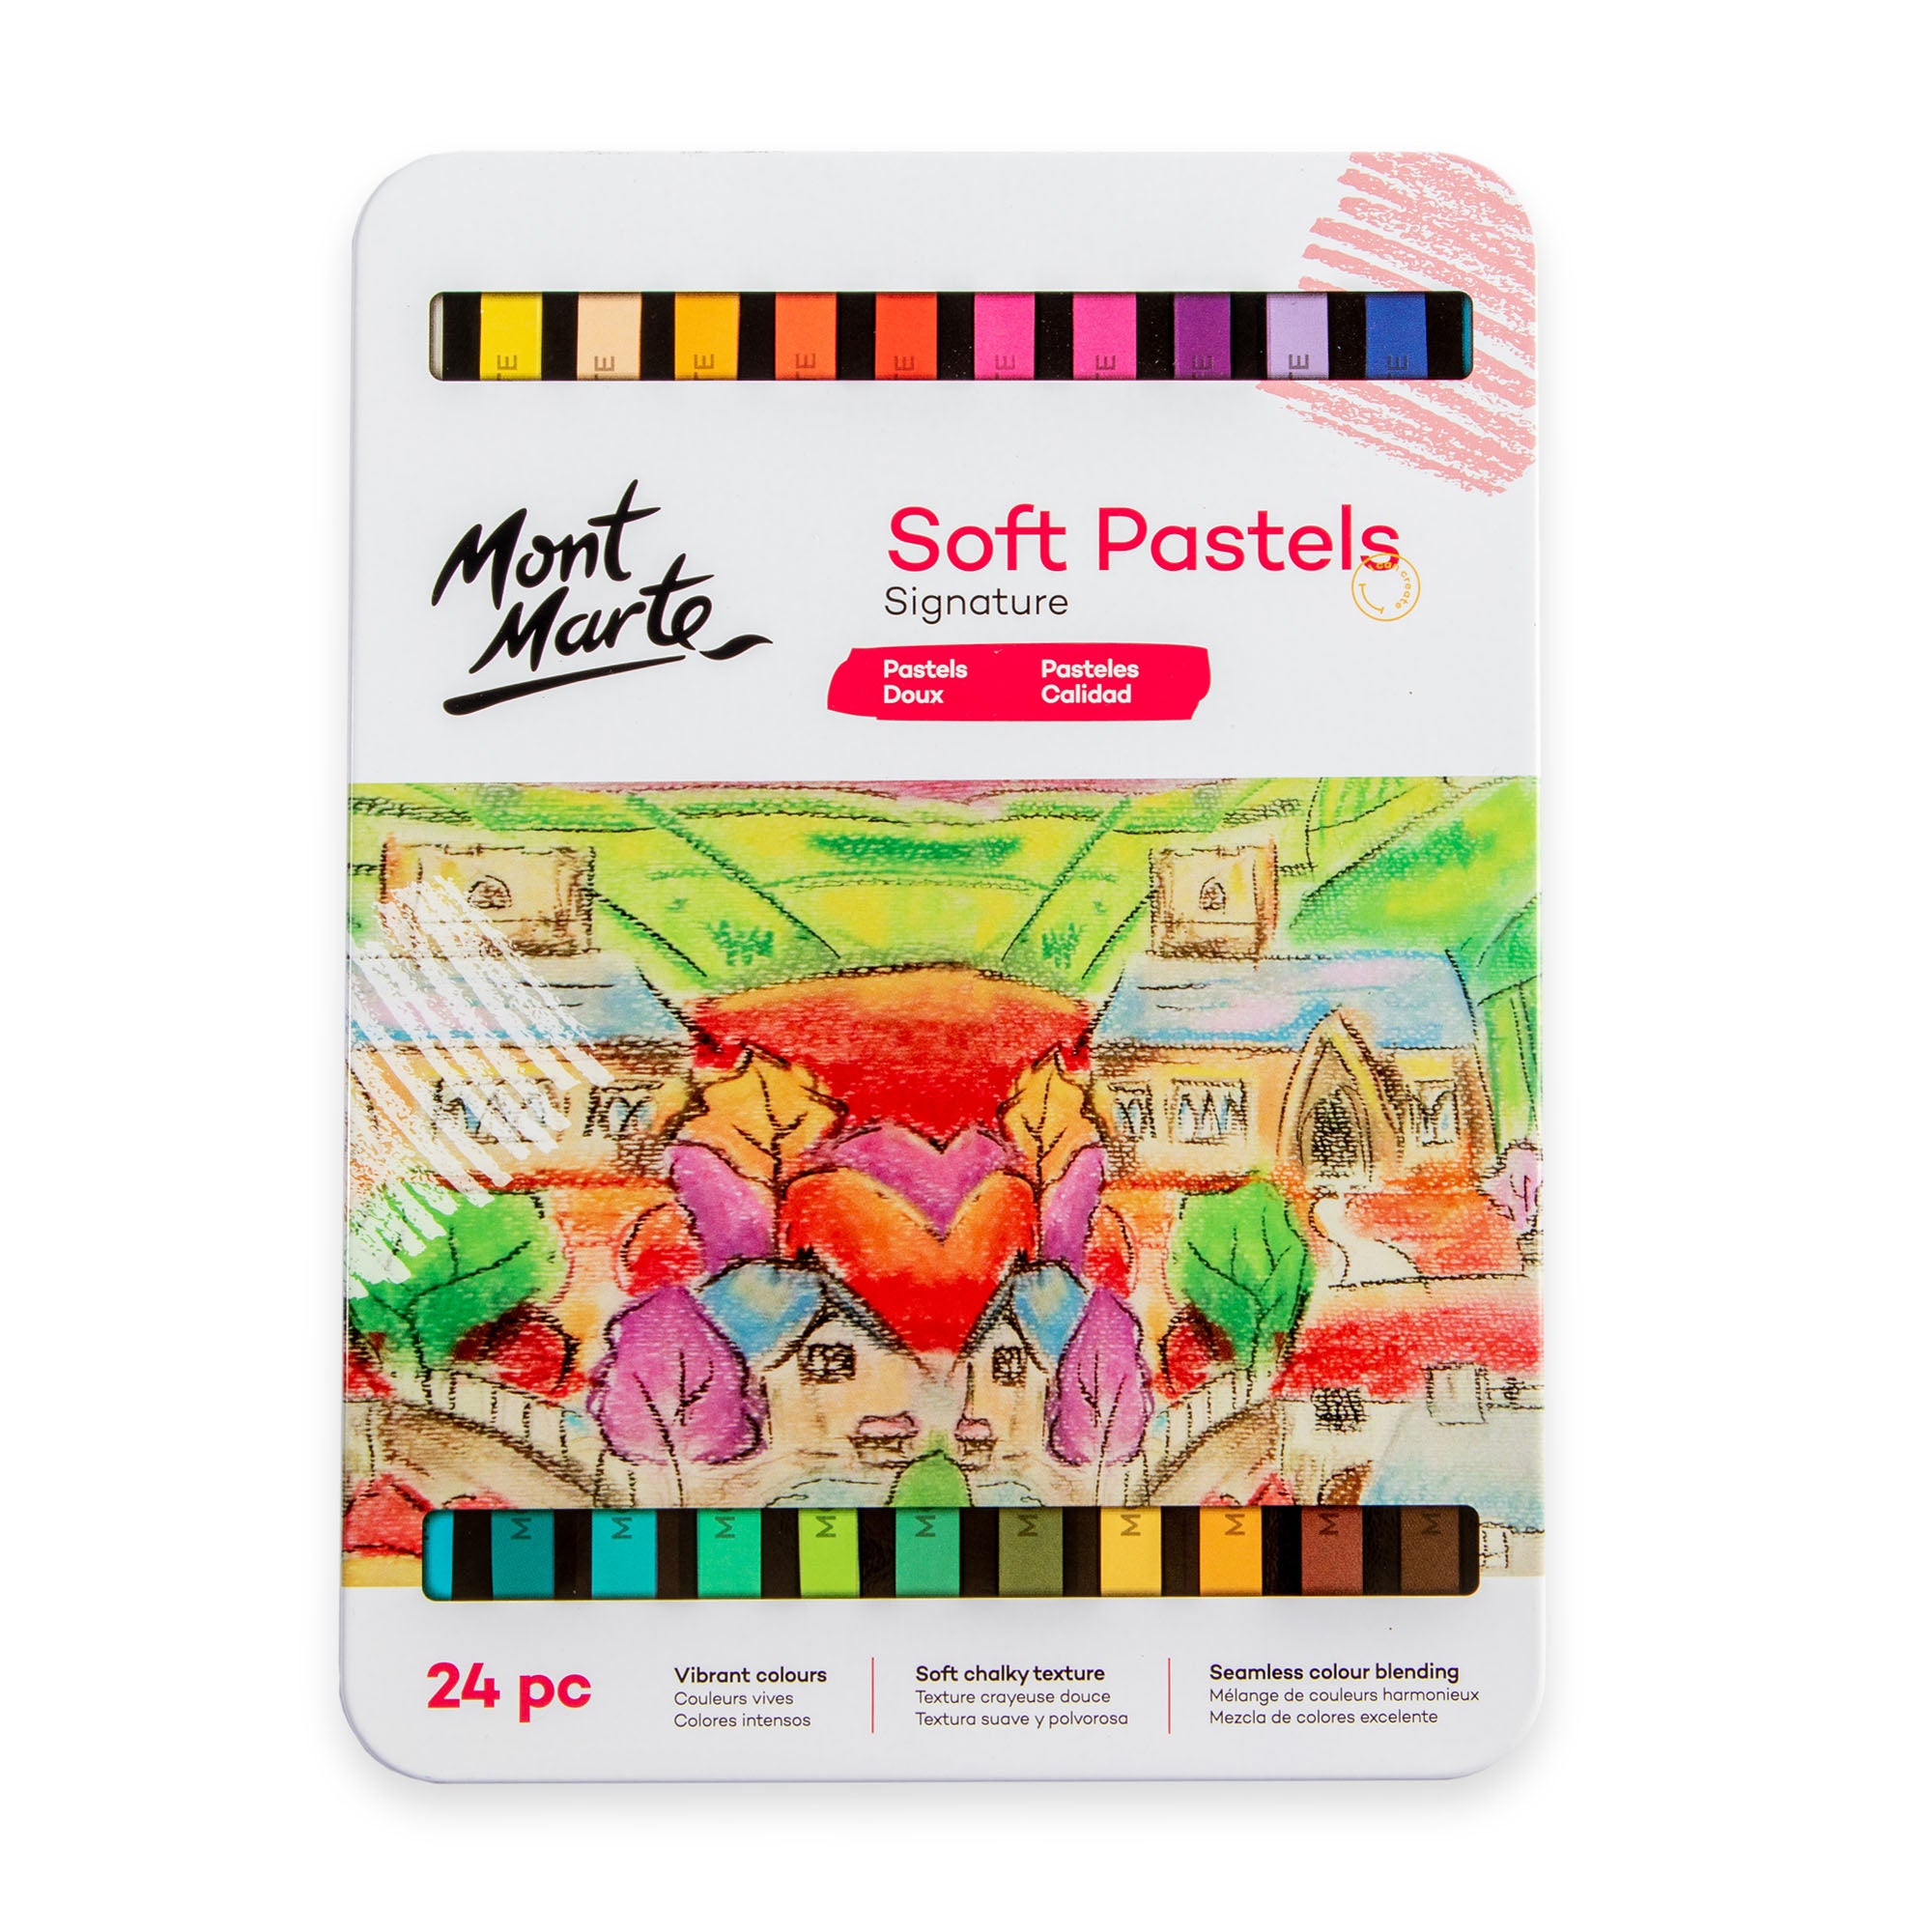 Mont Marte Soft Pastels In Tin Box - Dollars and Sense